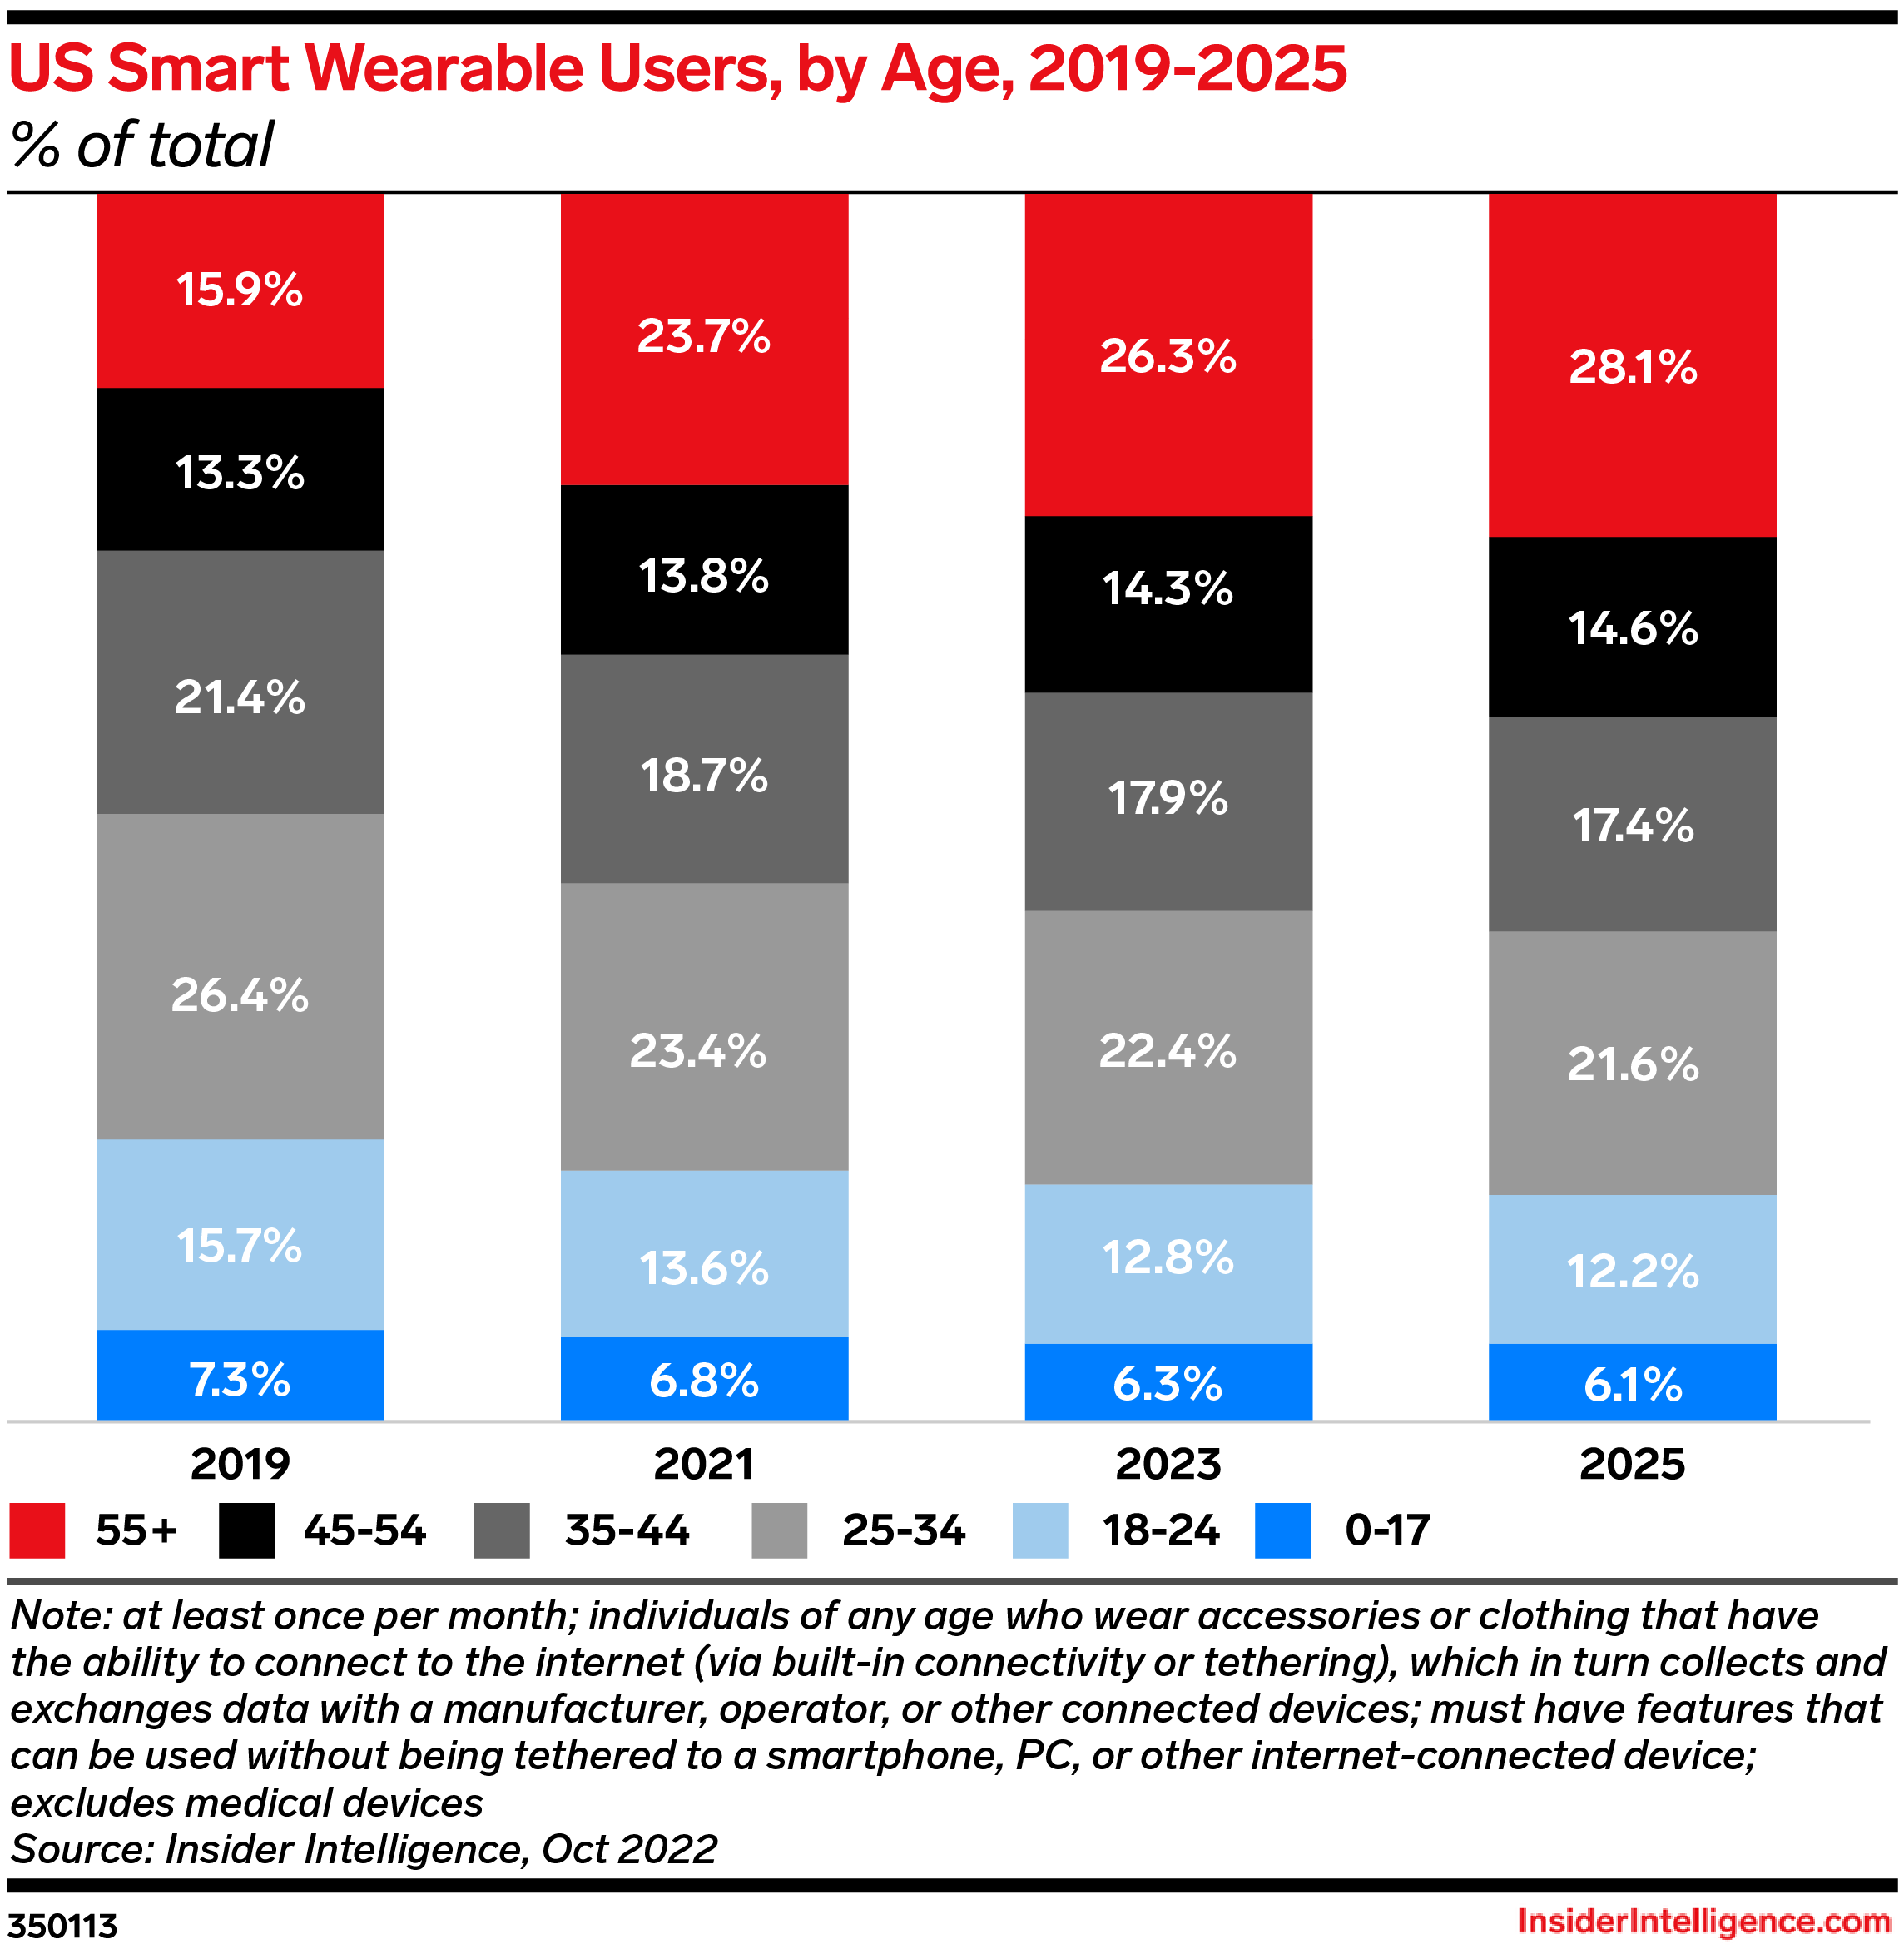 US Smart Wearable Users, by Age, 2019-2025 (% of respondents)